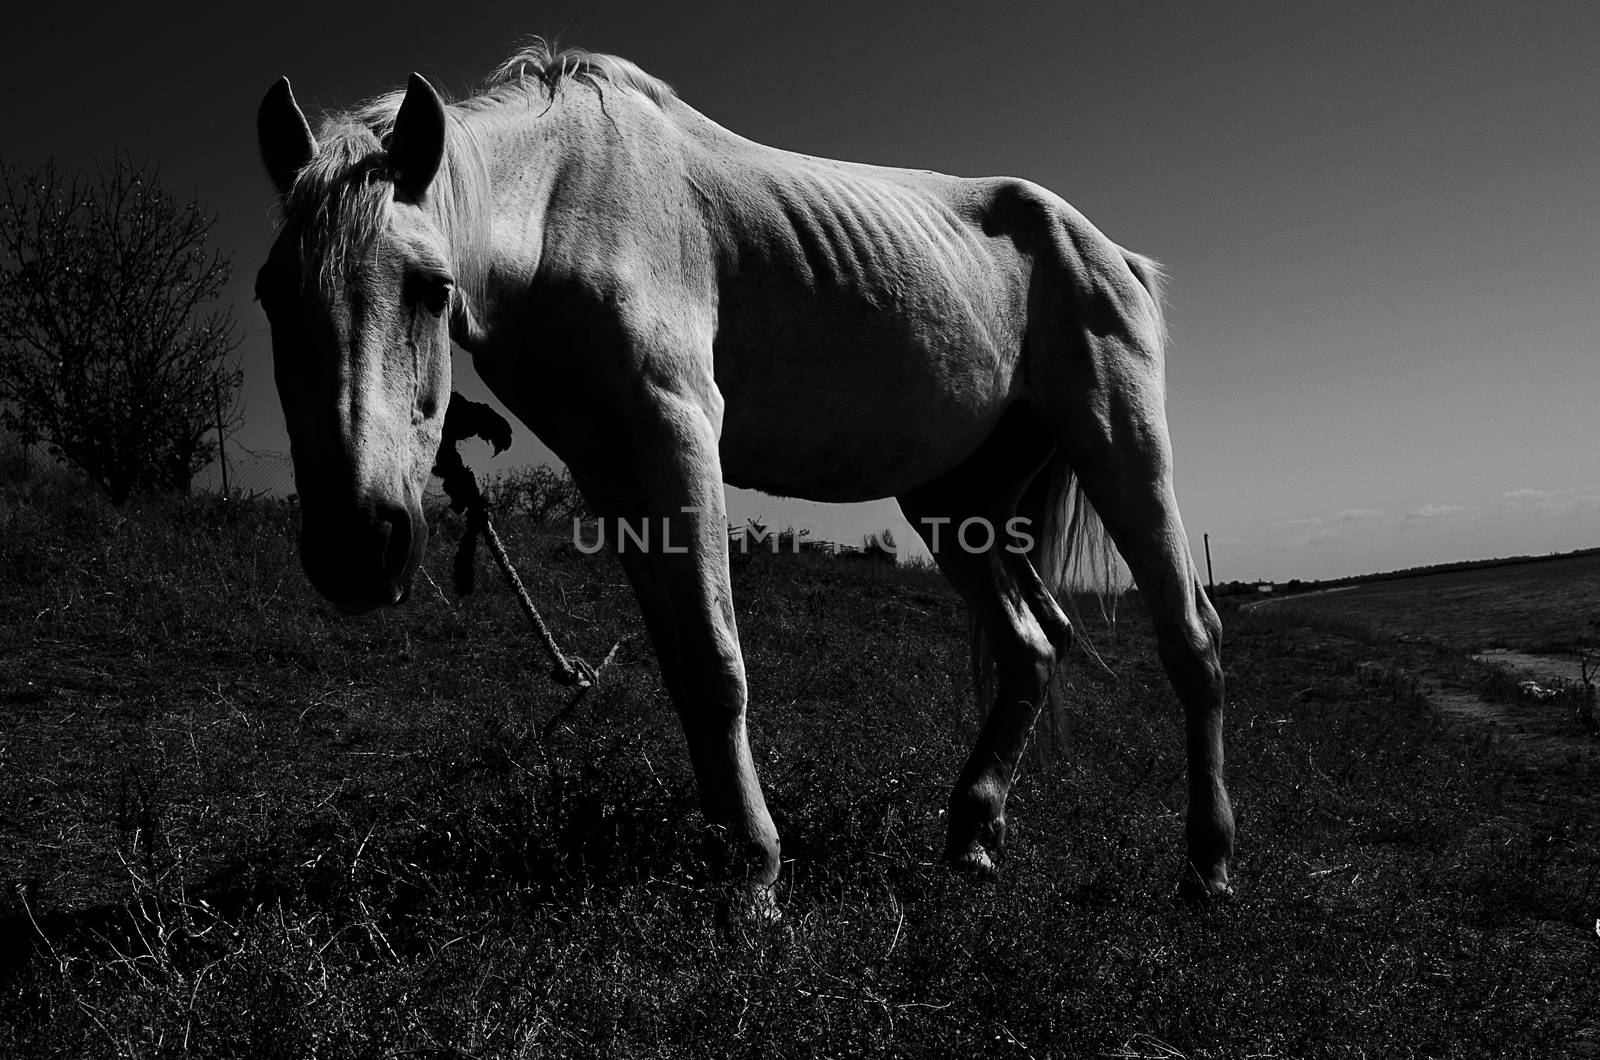 Groomed white horse grazing in a field near the river. Black and white photo. Horizontal